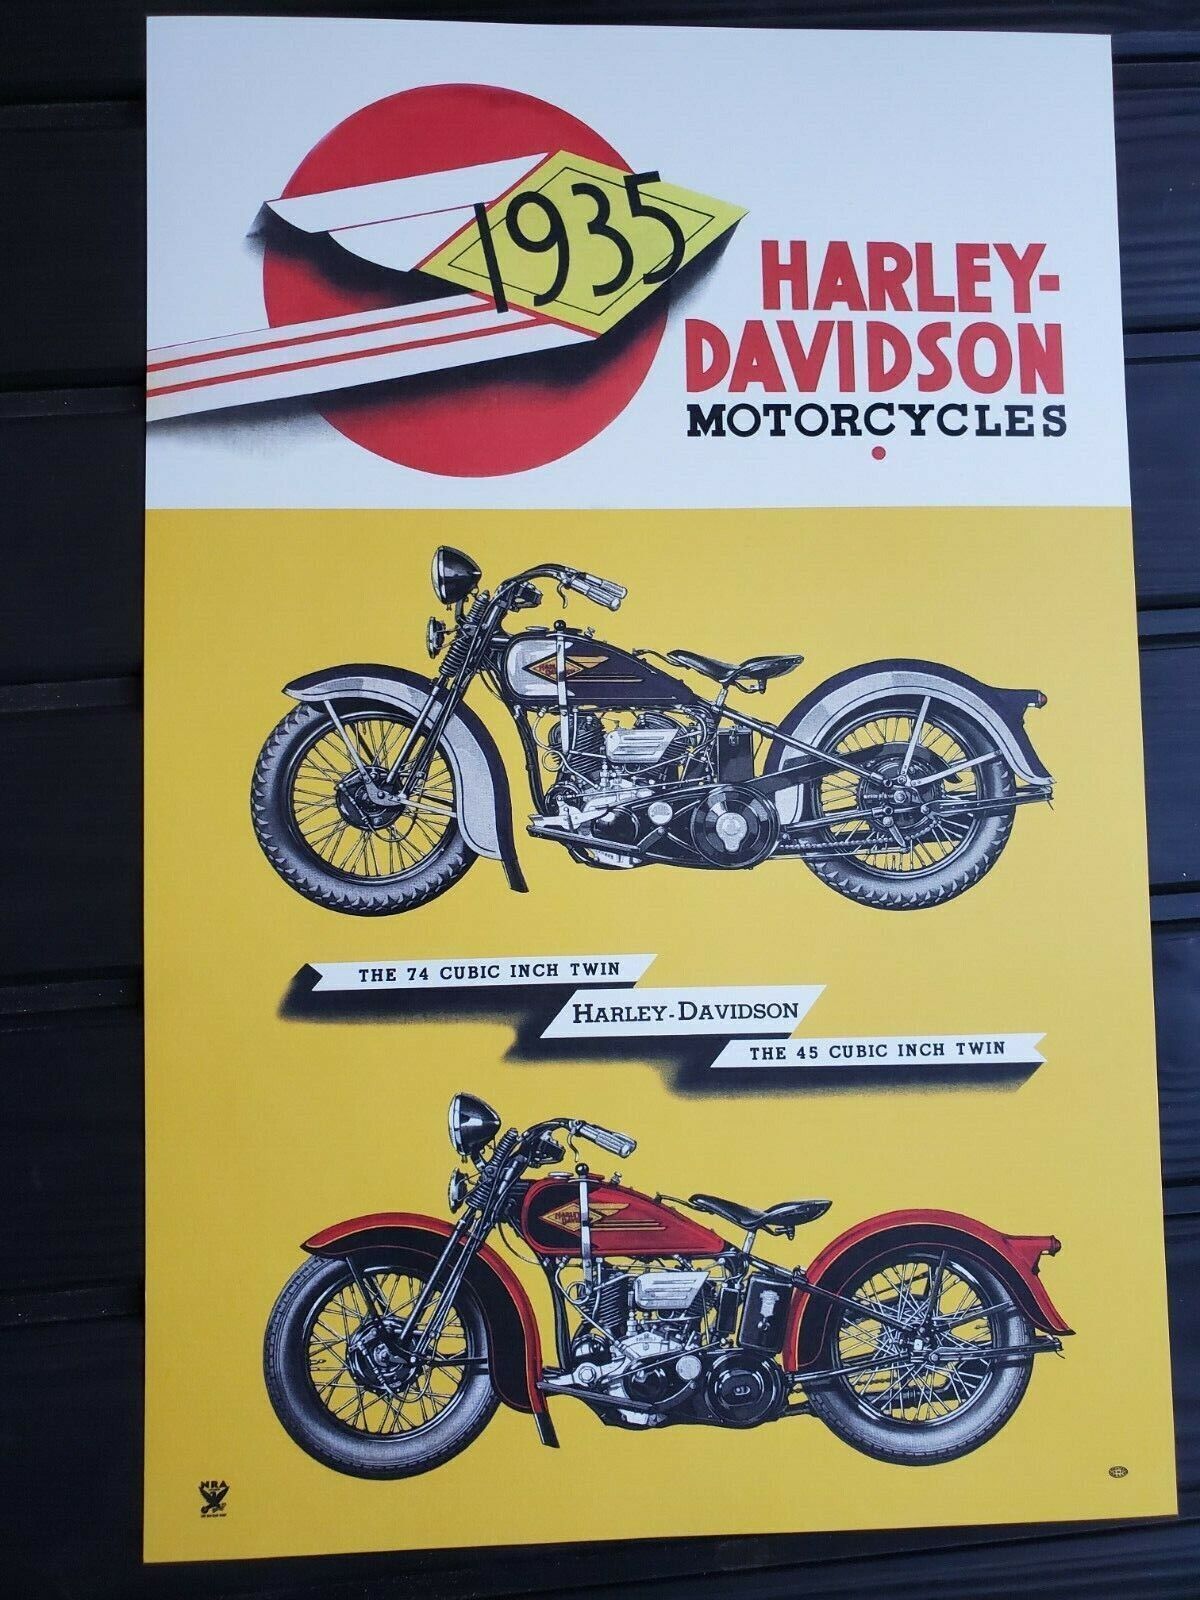 Harley Davidson Motorcycles Vintage 1935 12 x 18 Poster Sign Ad NEW OLD STOCK